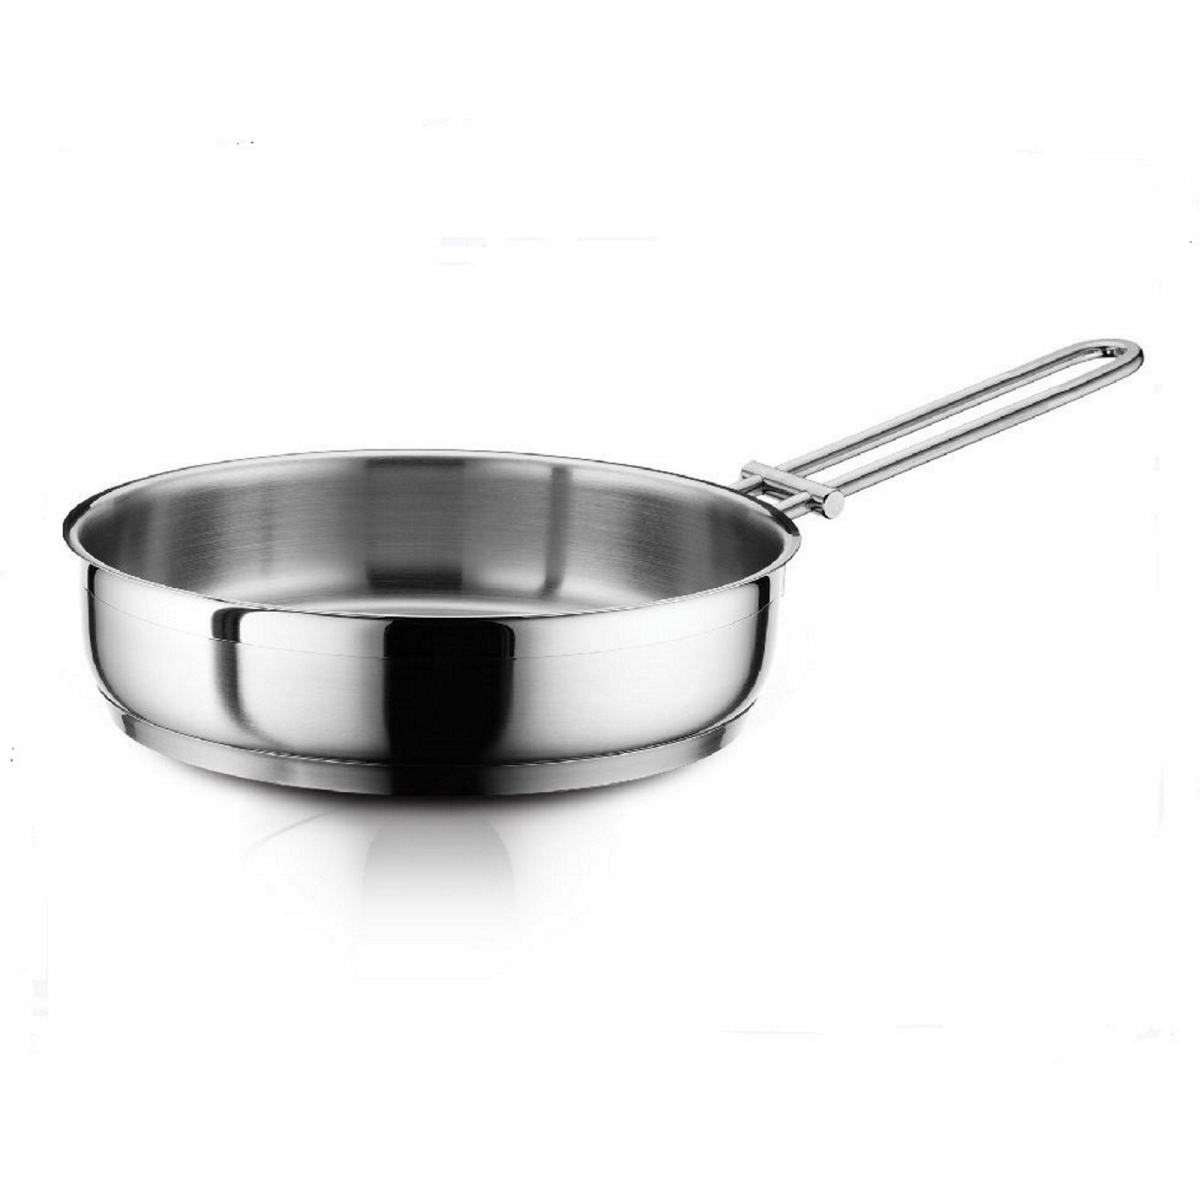 Hf10 10 In. Classic 18 By 10 Stainless Steel Deep Frying Stir Fry Pan